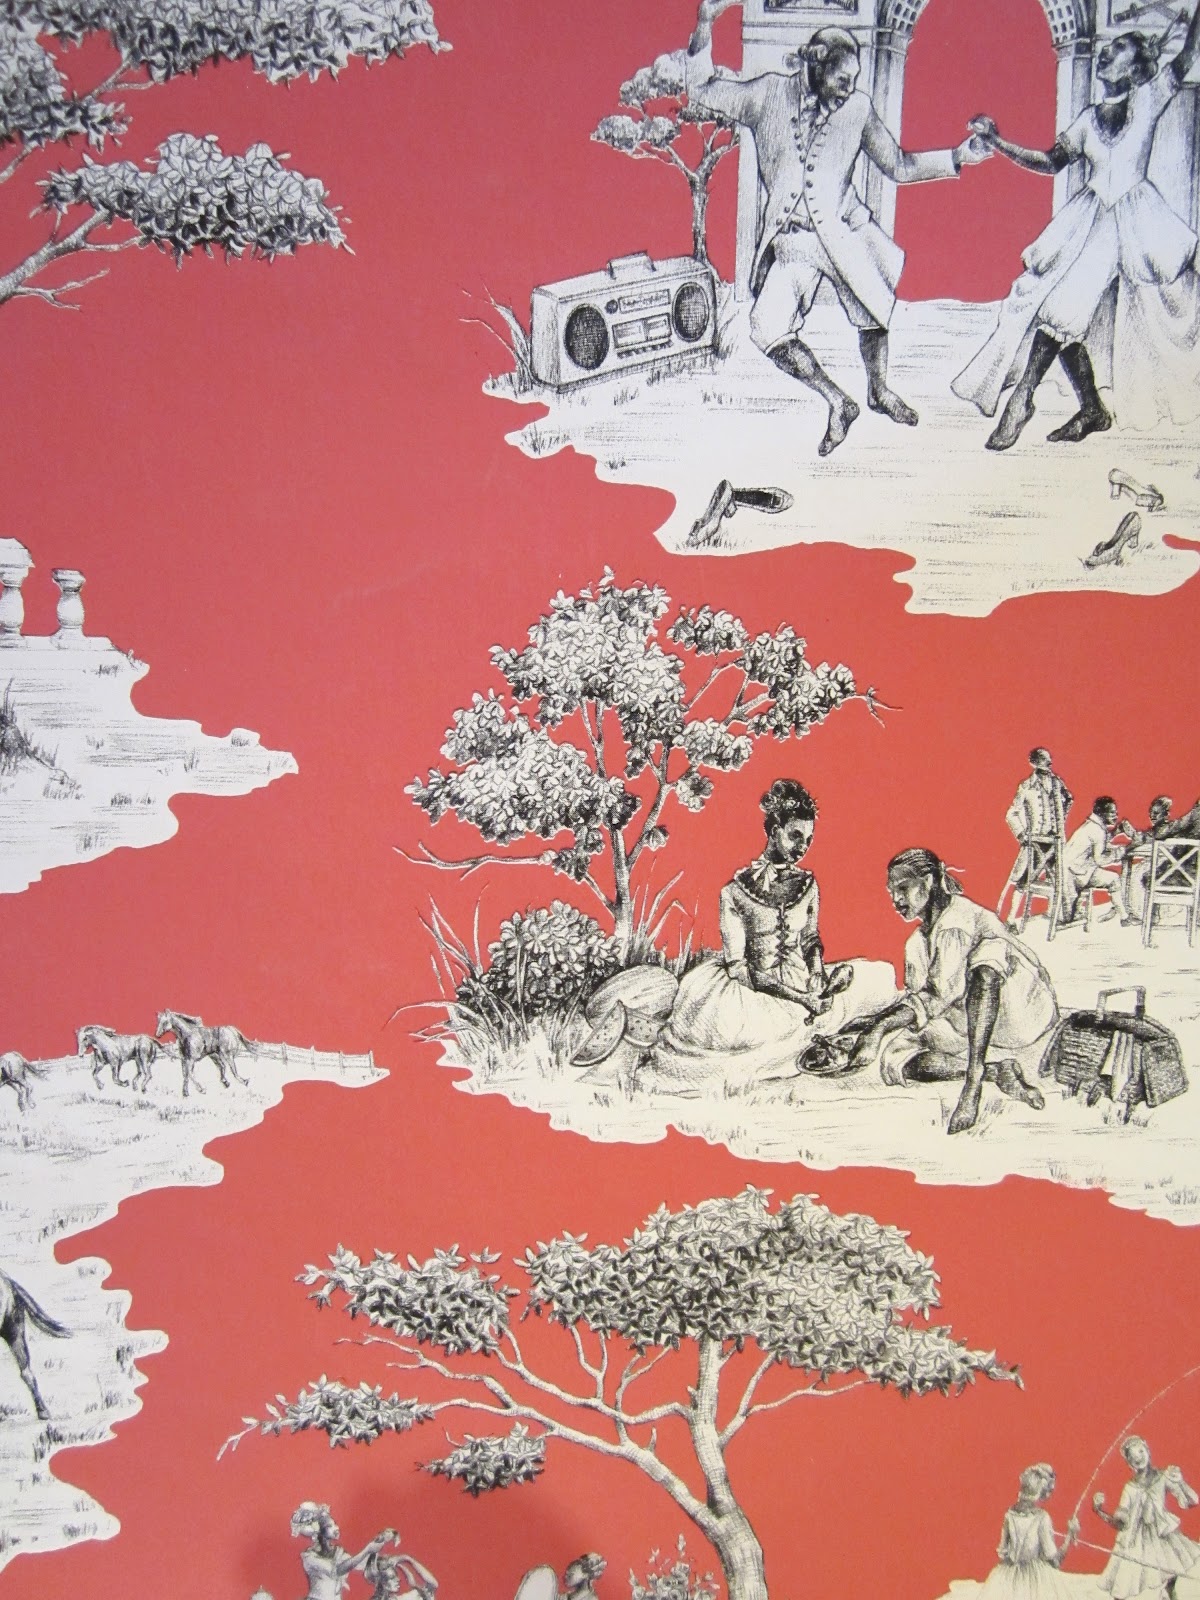 Toile De Jouy By Way Of Harlem The Paper Trail